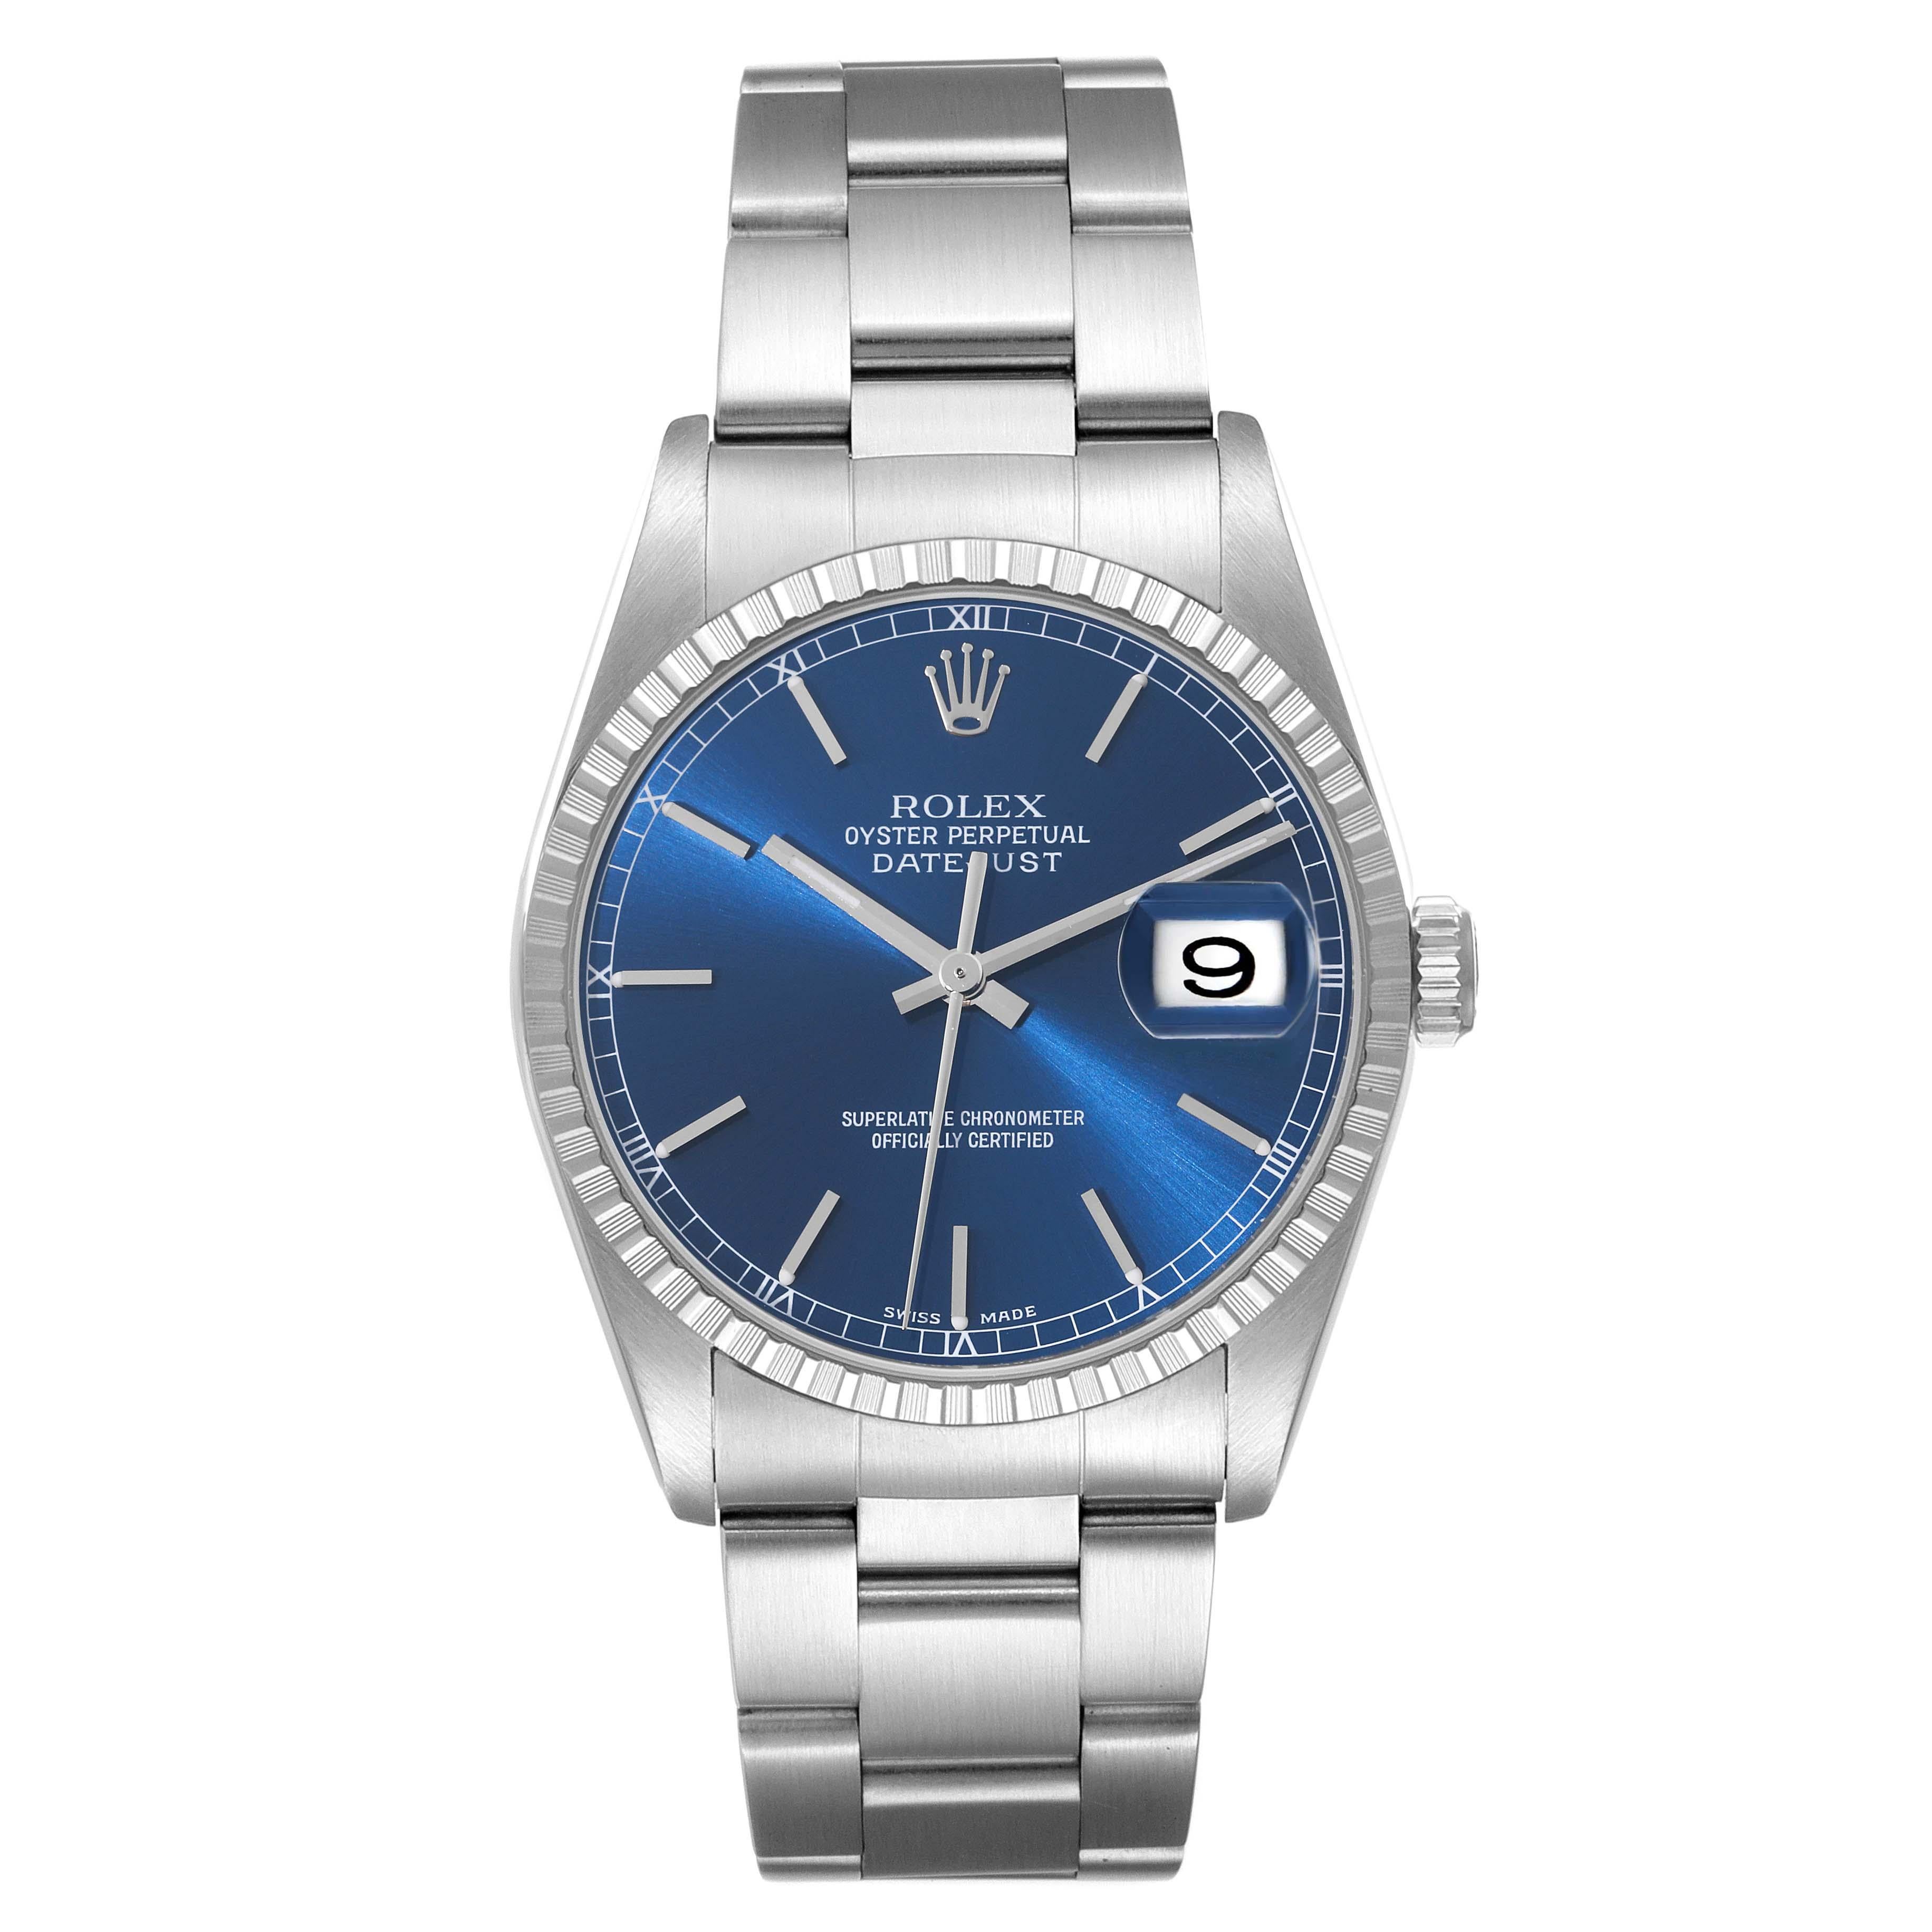 Rolex Datejust Blue Dial Engine Turned Bezel Steel Mens Watch 16220. Officially certified chronometer self-winding movement. Stainless steel oyster case 36.0 mm in diameter. Rolex logo on the crown. Stainless steel engine turned bezel. Scratch